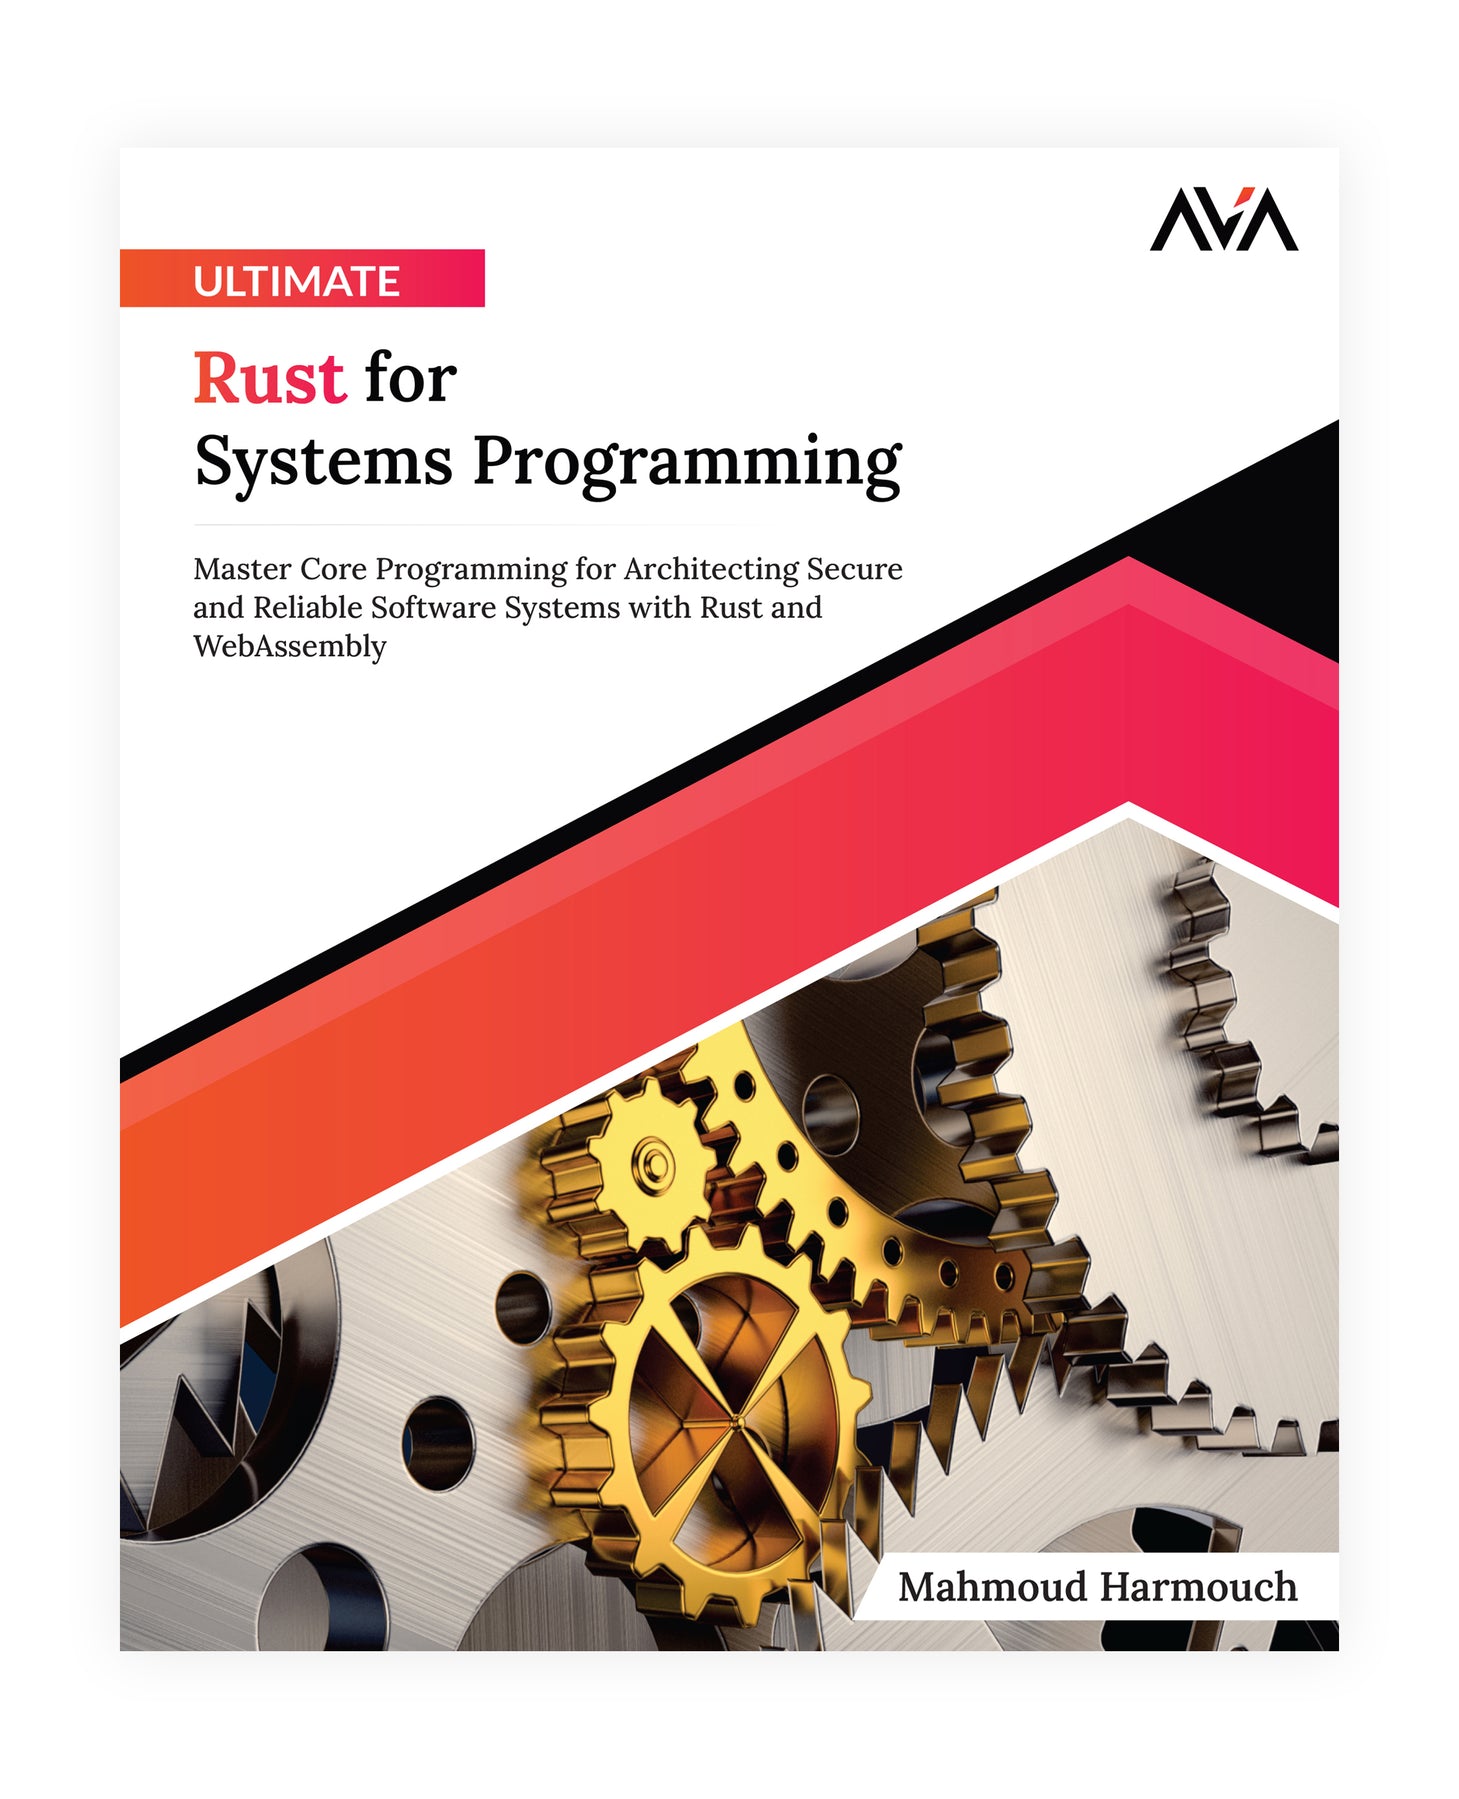 Ultimate Rust for Systems Programming: Master Core Programming for Architecting Secure and Reliable Software Systems with Rust and WebAssembly